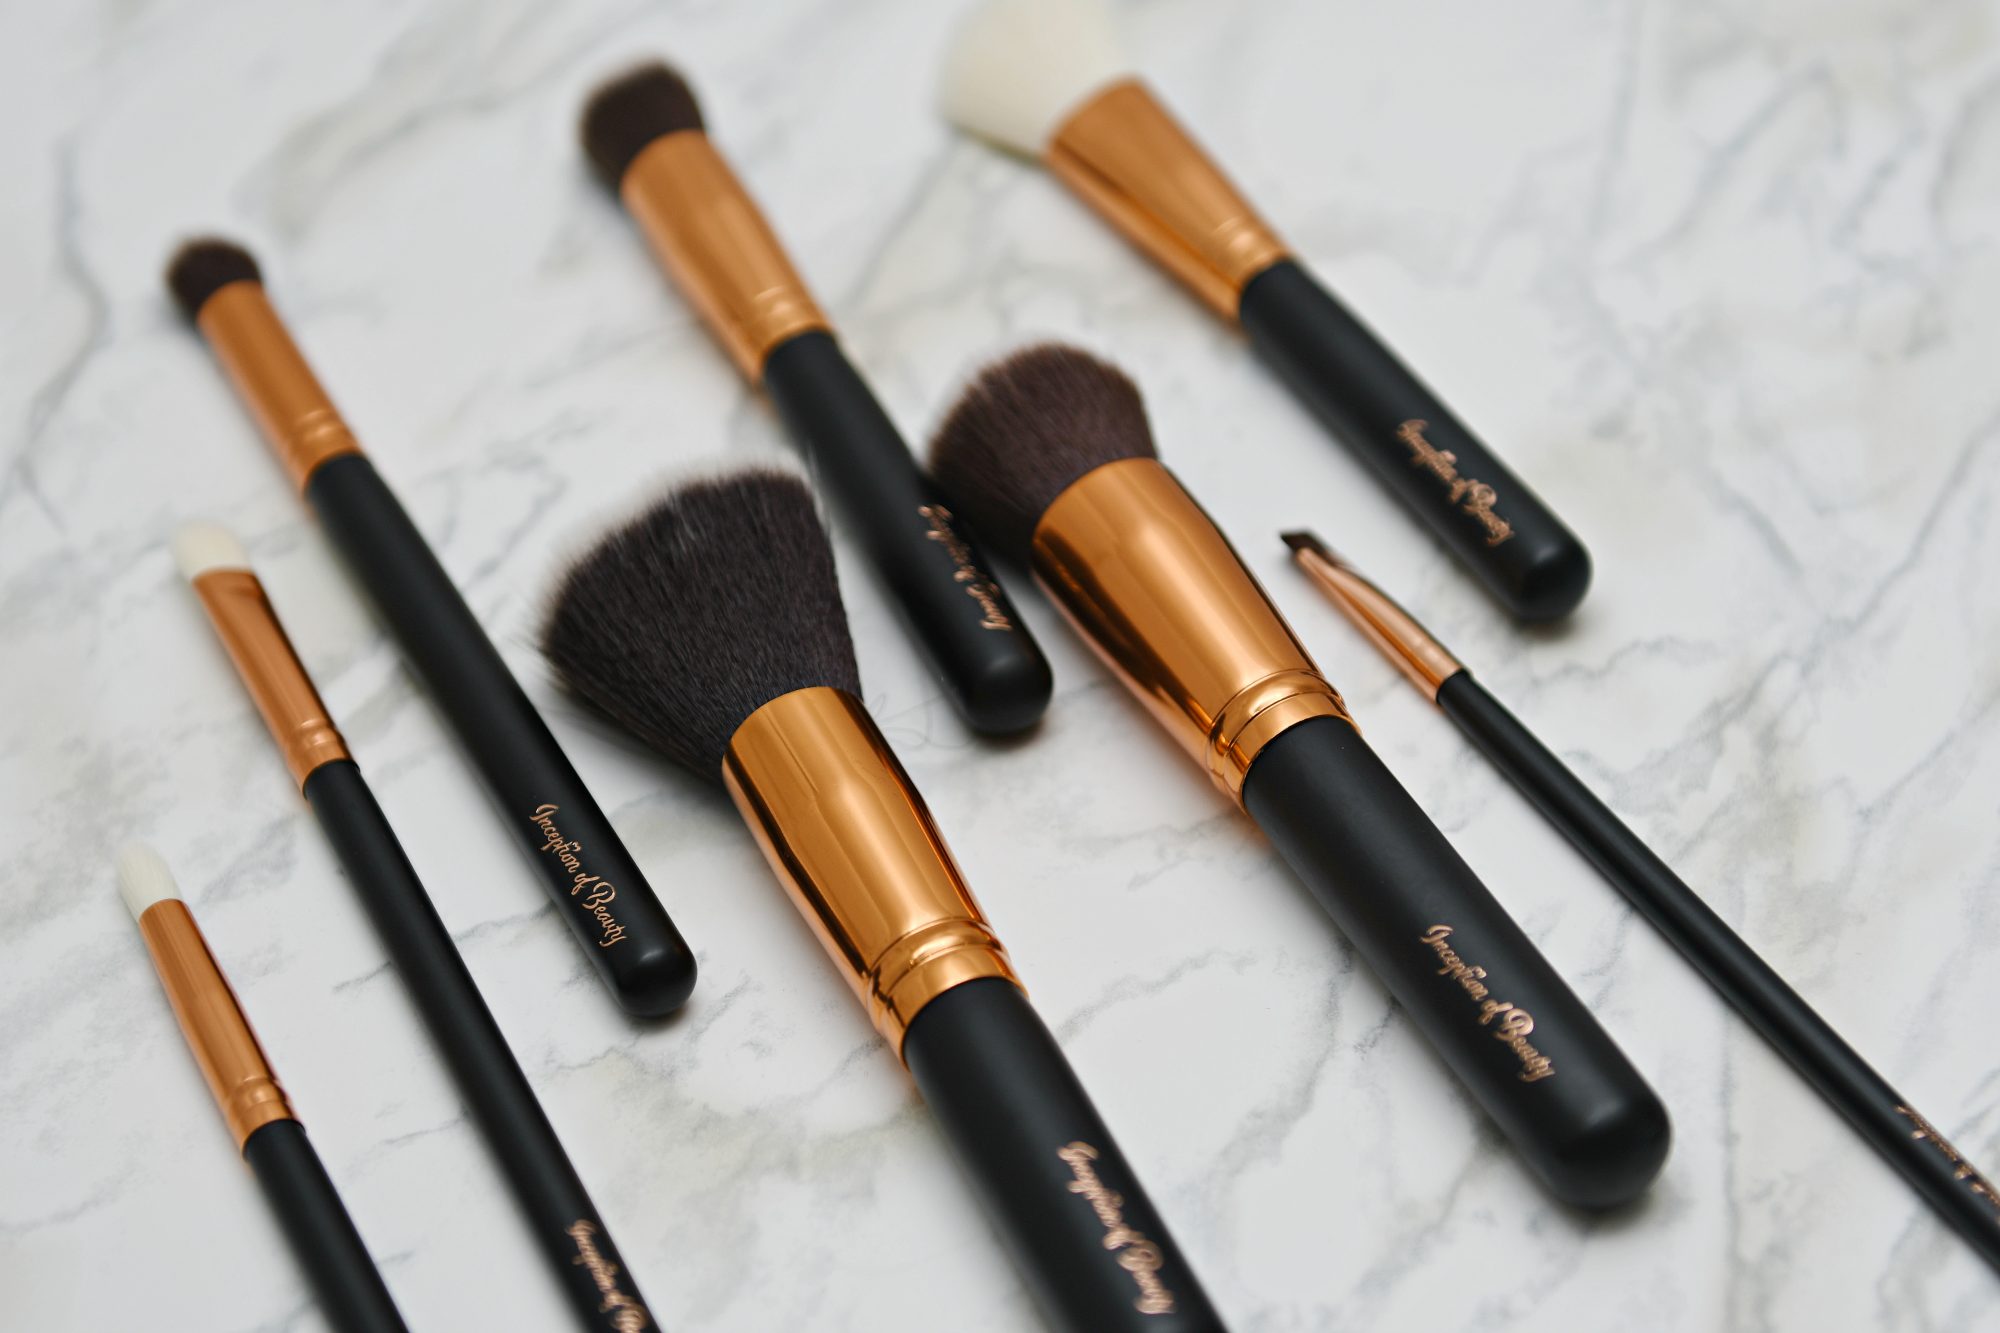 Oval Makeup Brushes - Rose Gold – CLEOF COSMETICS